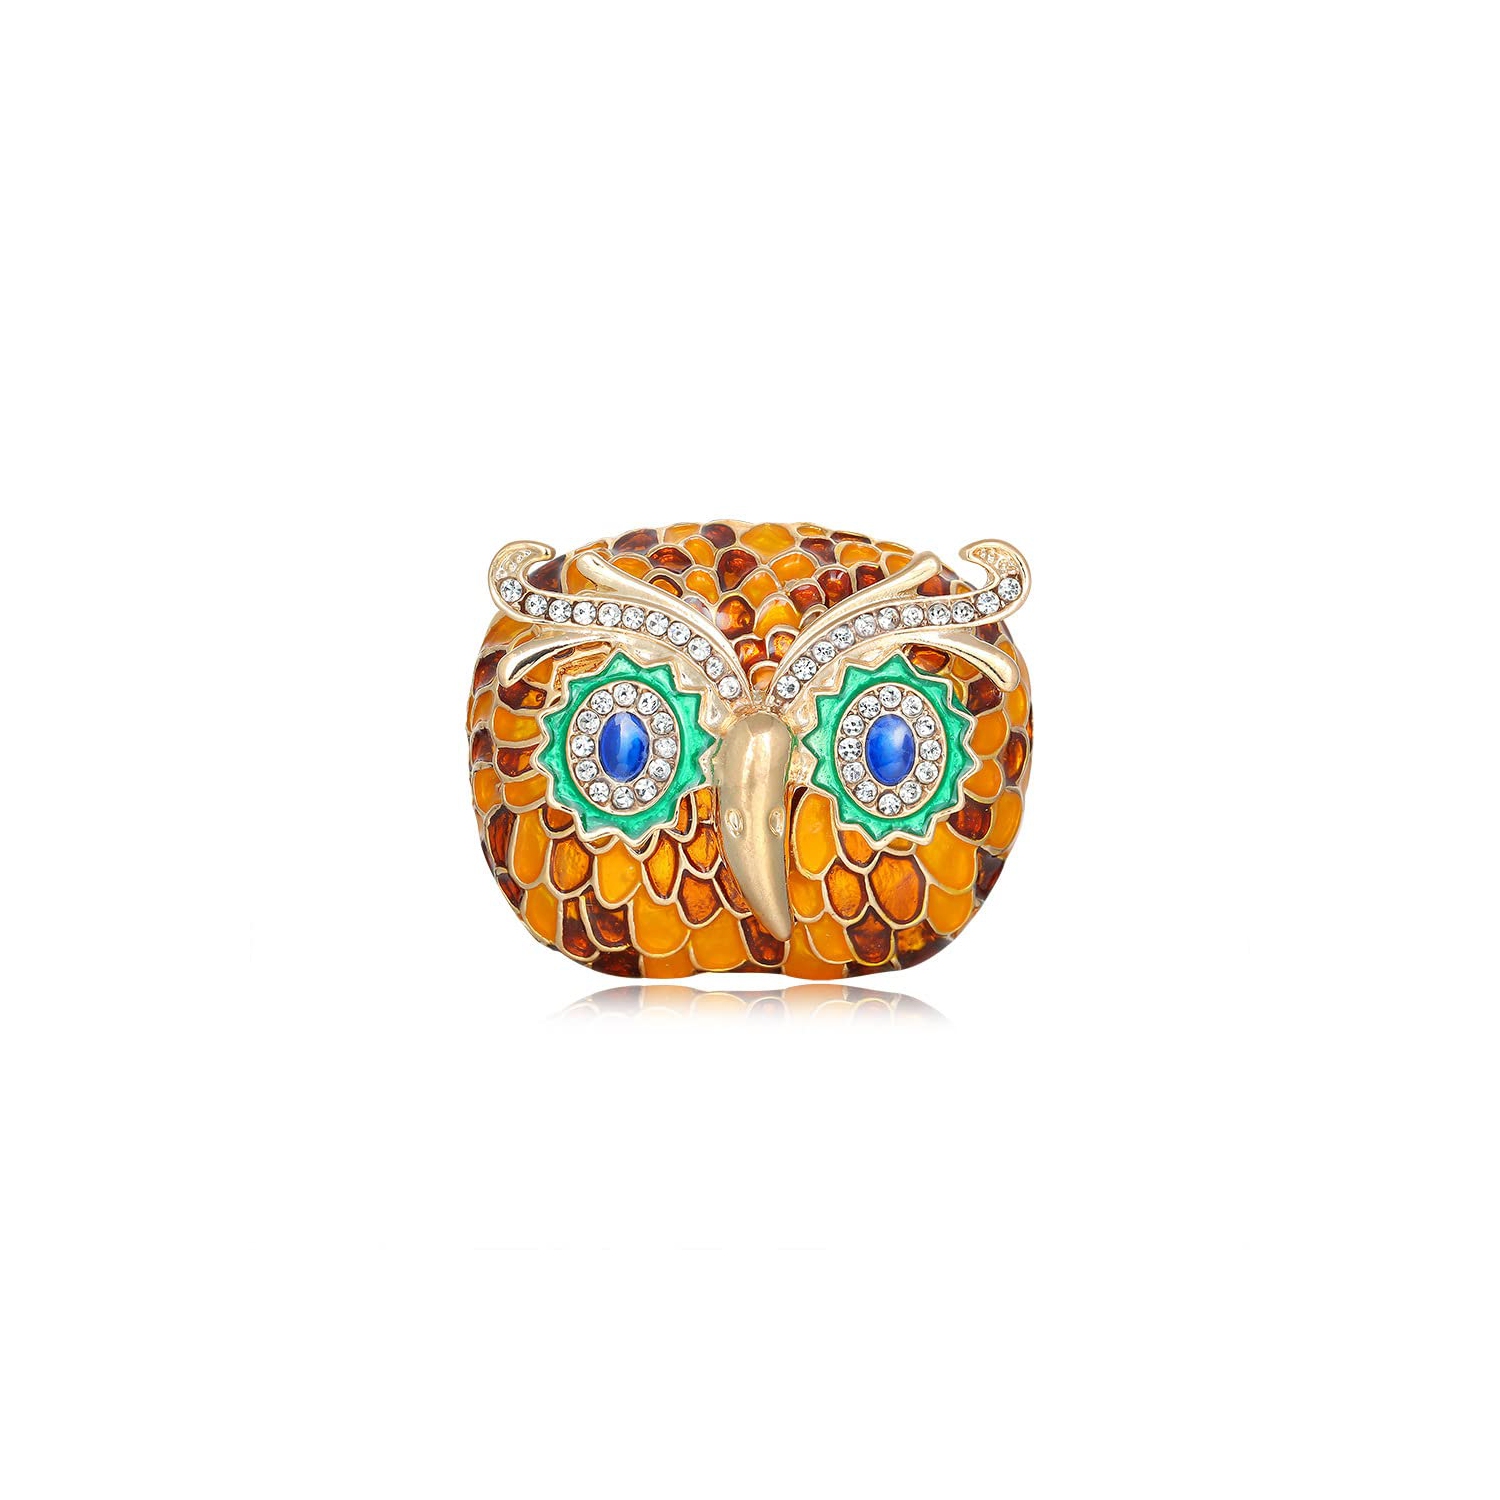 Stylish Owl Brooch Pin for Women and Men - CZ Crystal Vintage Animal Lapel Pin Badge - Fashionable Corsage Scarf Shawl Clip - Ideal Clothing Dress Shirt Accessory